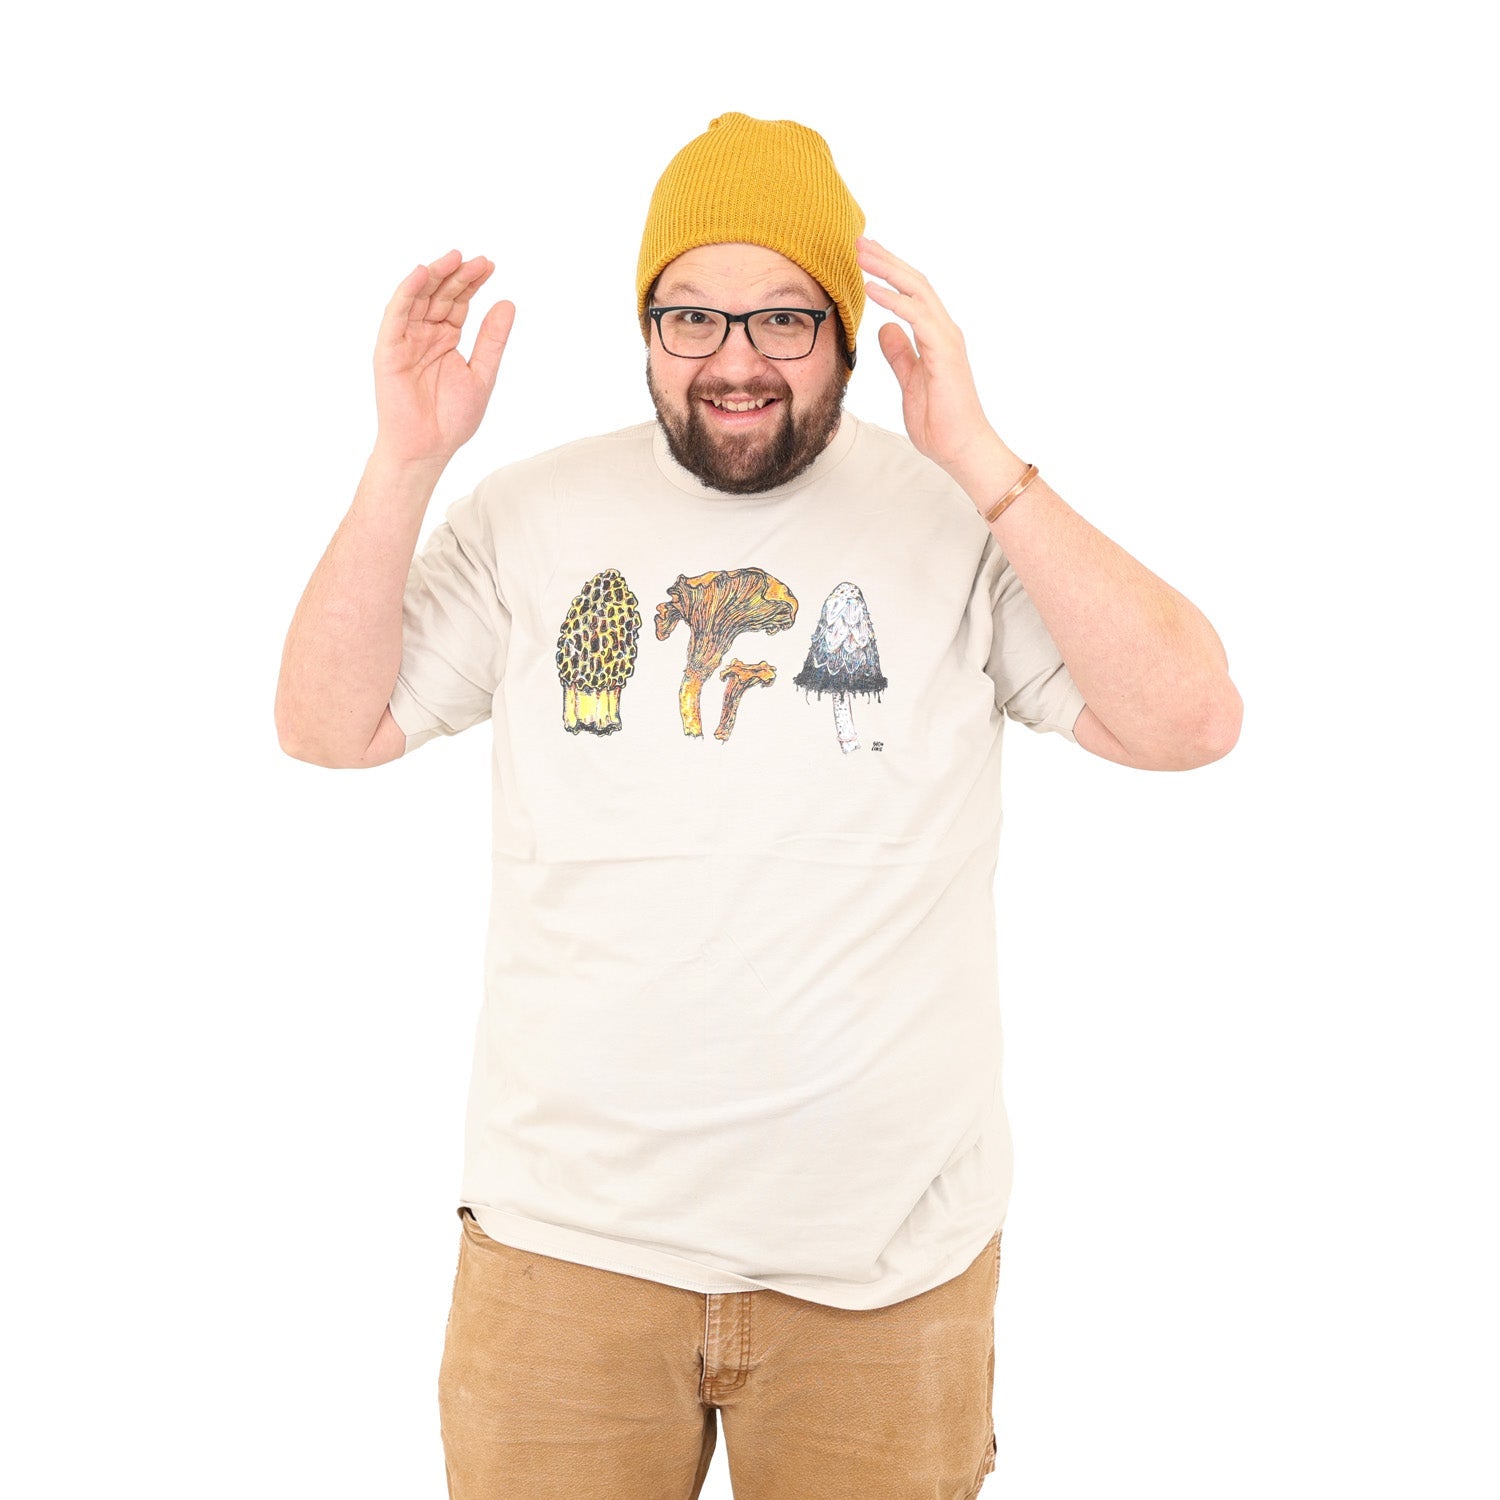 Man with his hands up by his head, smiling, wearing glasses and a beanie. Man is wearing a tan colored shirt with three mushrooms- morel, chantrelle, and shaggy mane